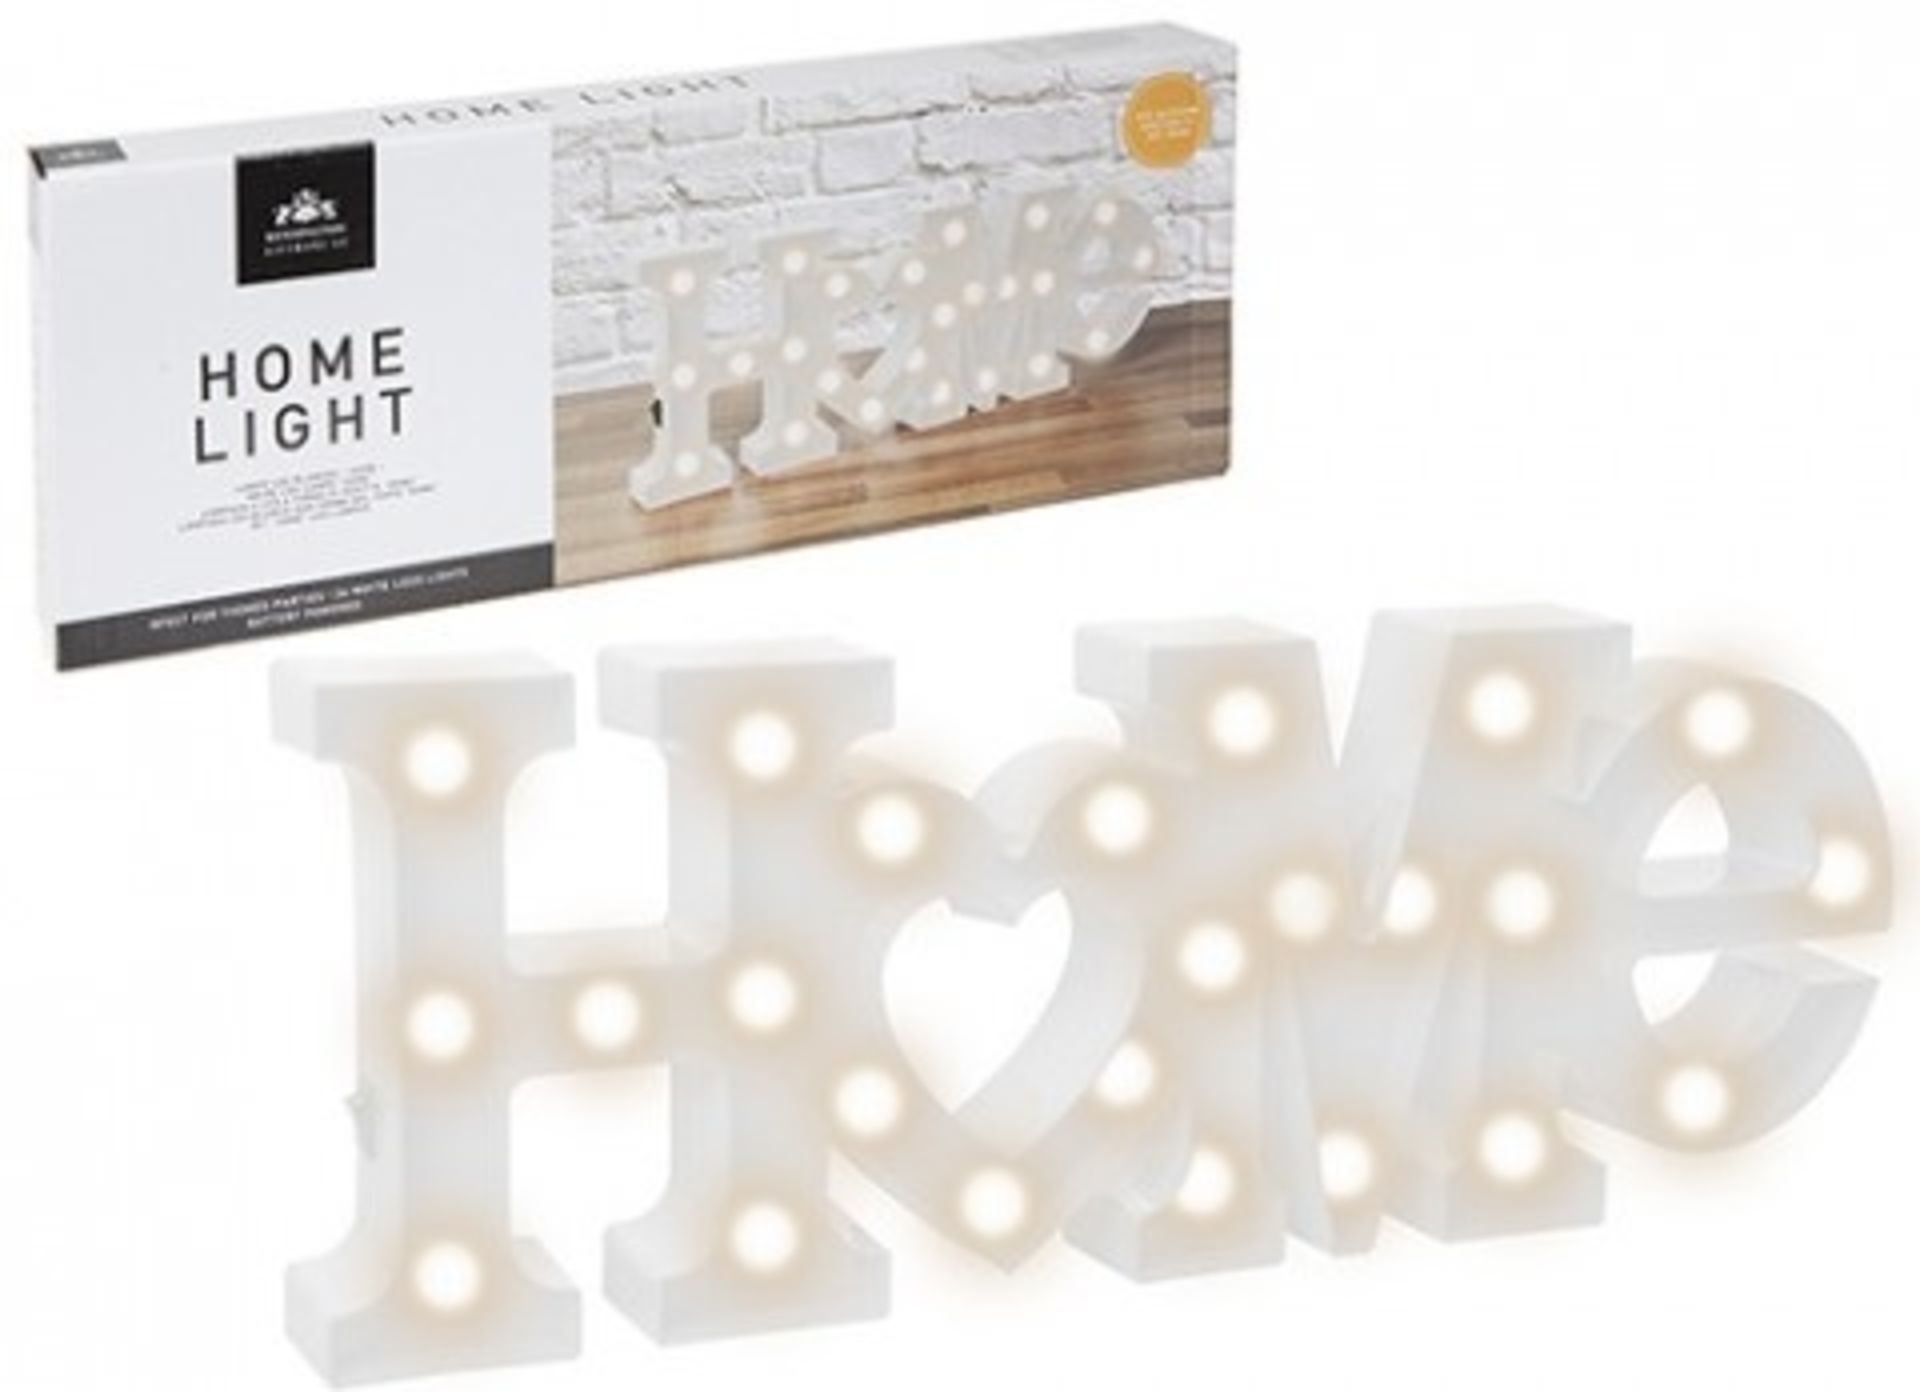 V Brand New White Home Light - Perfect For Themed Parties - With 24 White LED Lights - Battery